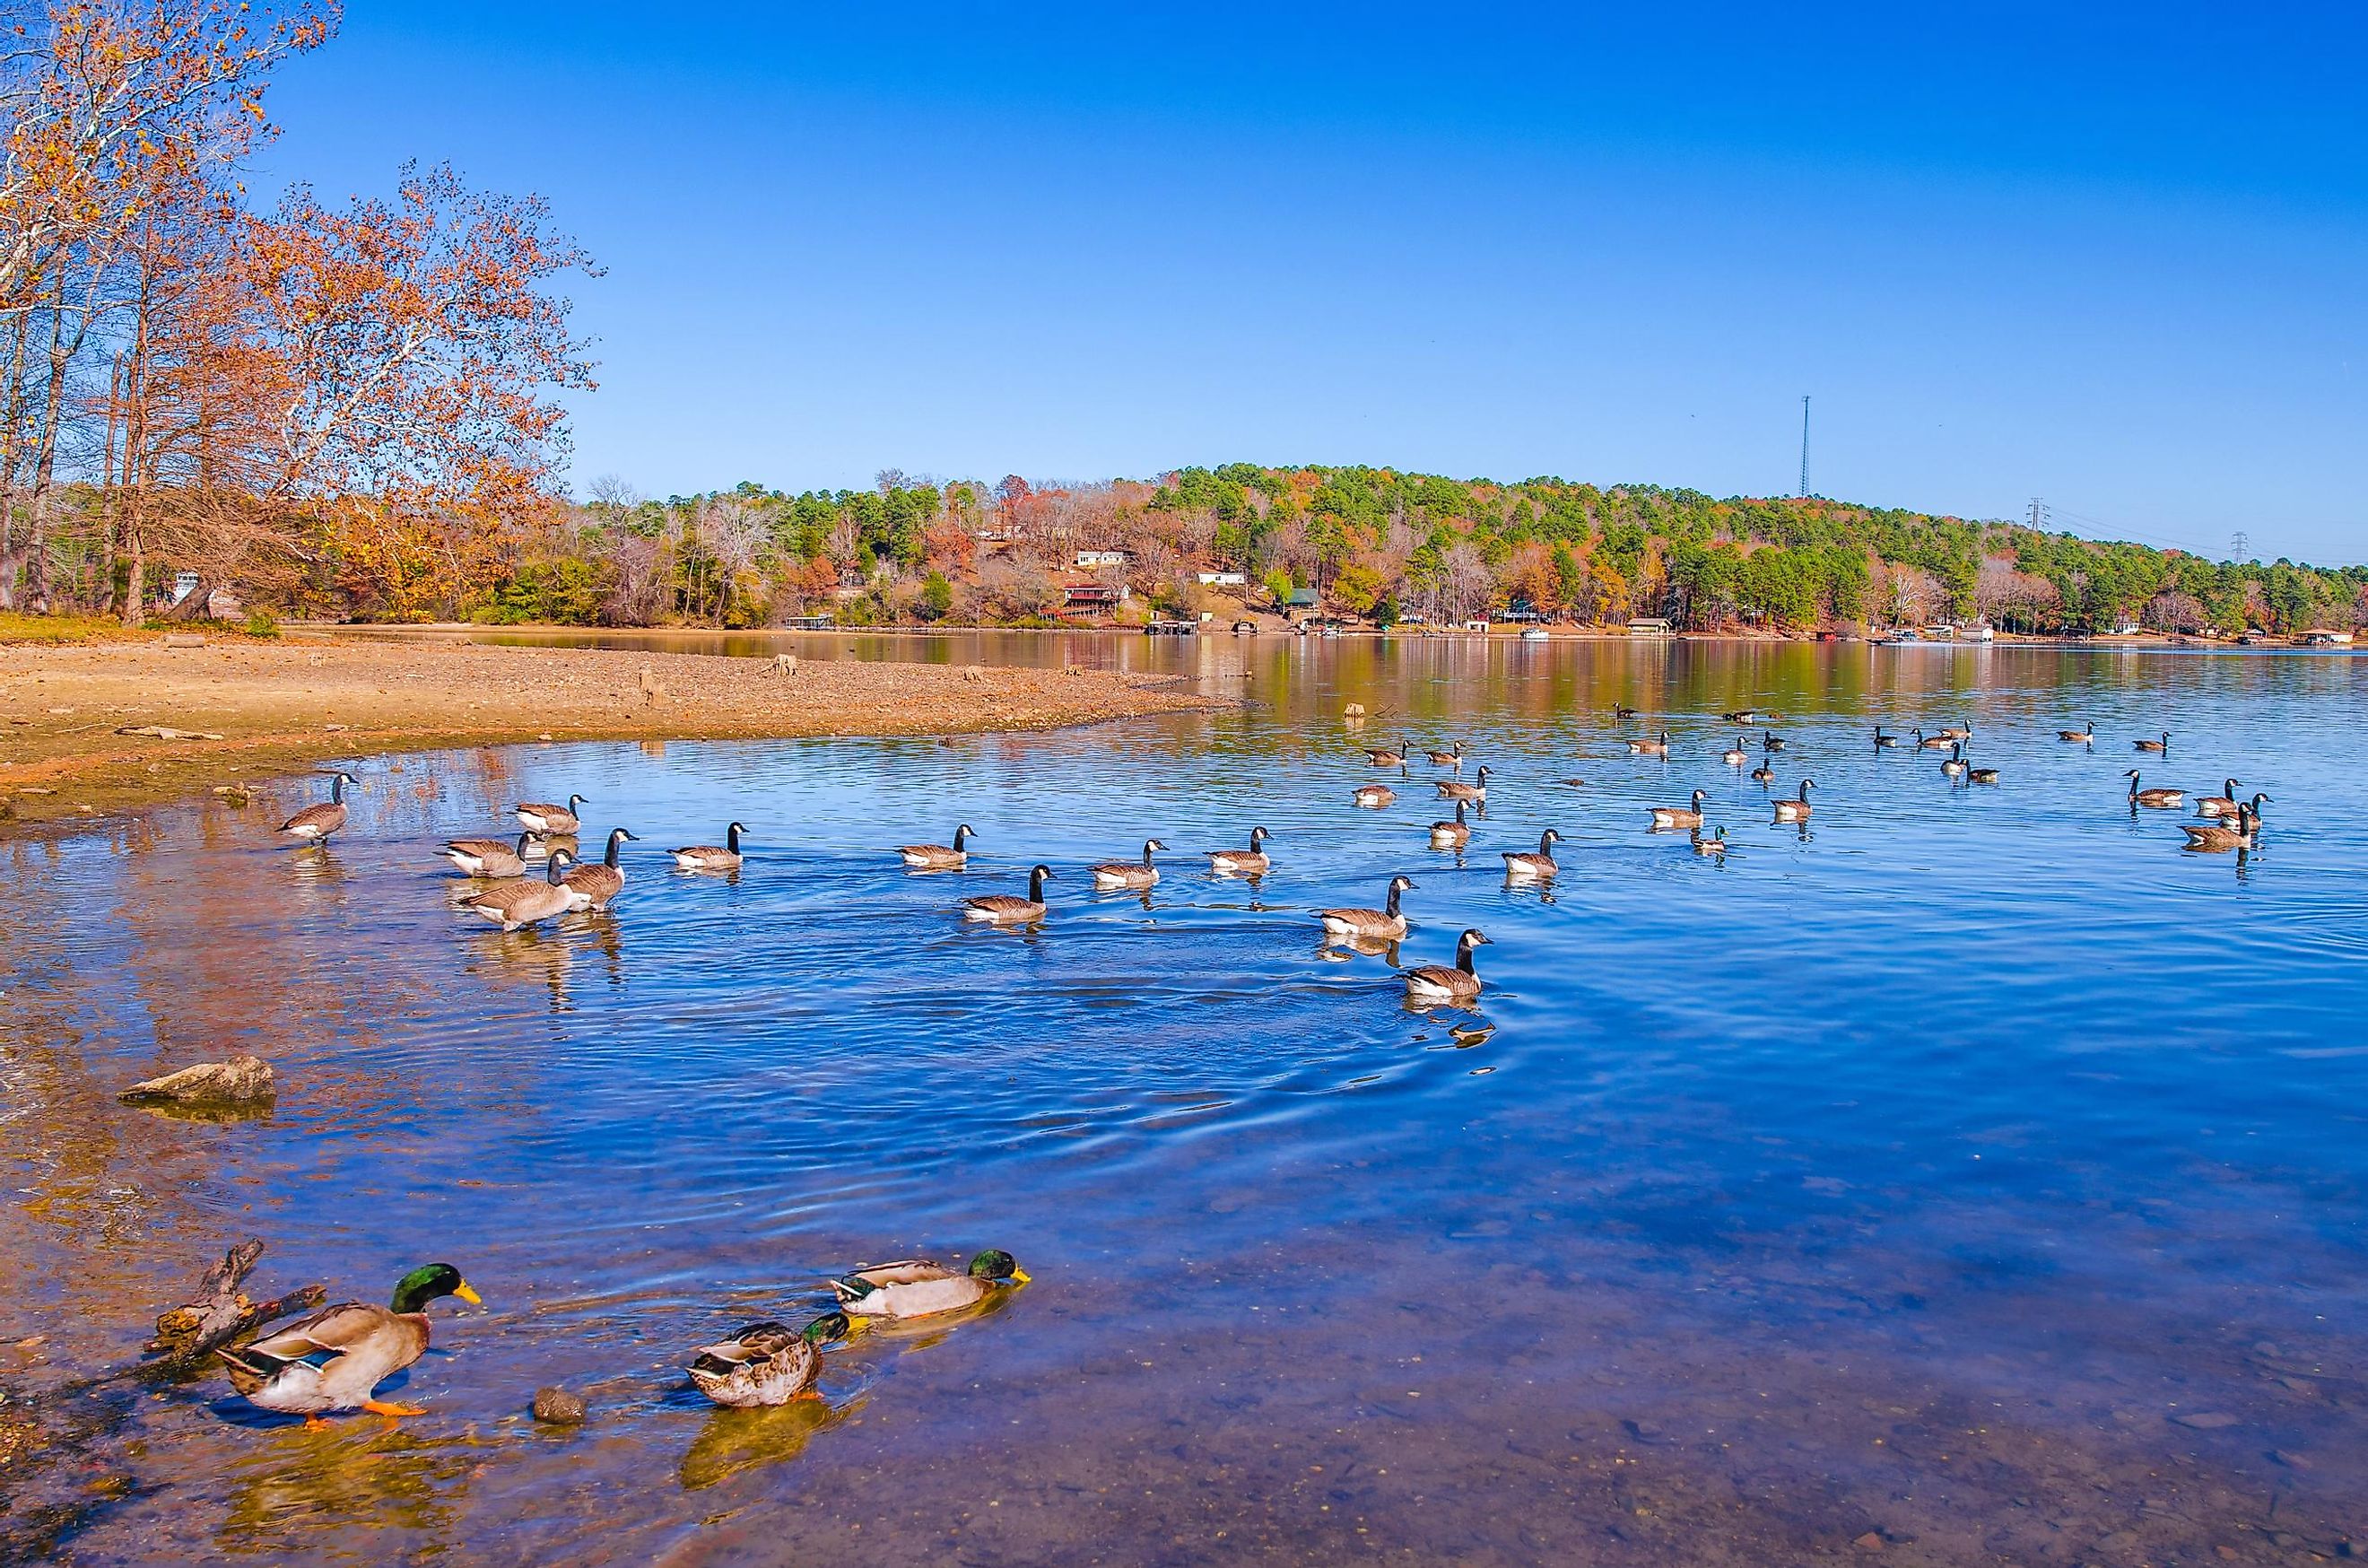 A flock of geese in Lake Catherine, Arkansas.